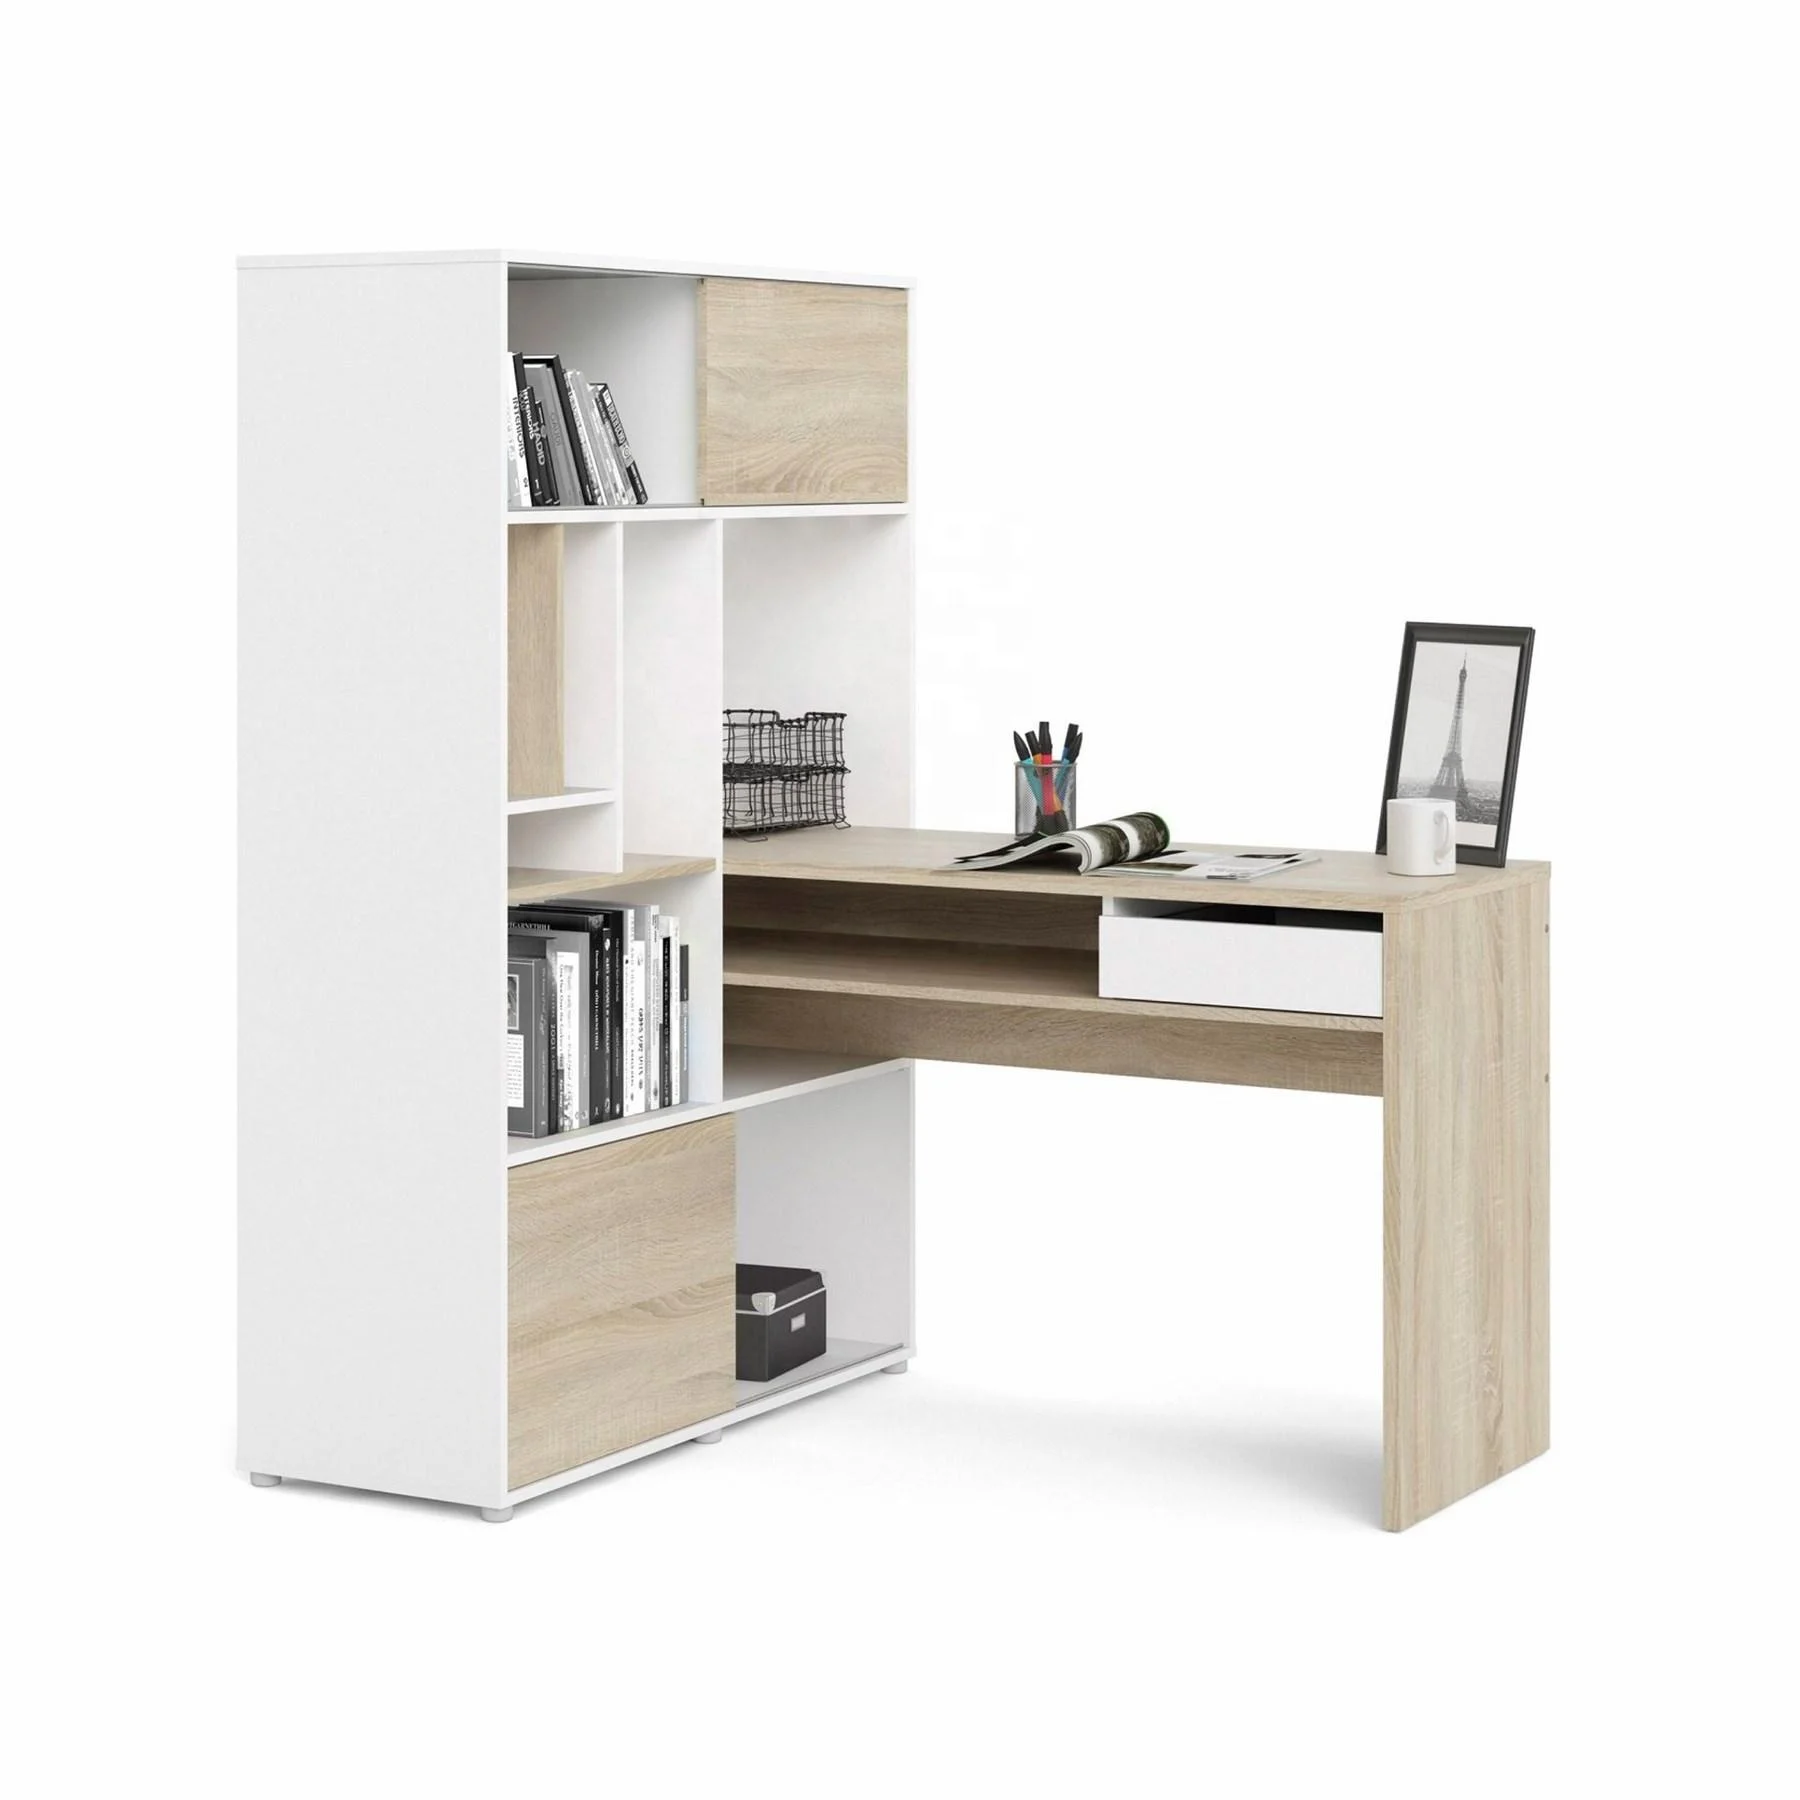 NOVA Working Desk Office Melamine Living Room Table With Bookcase And Writing Desk